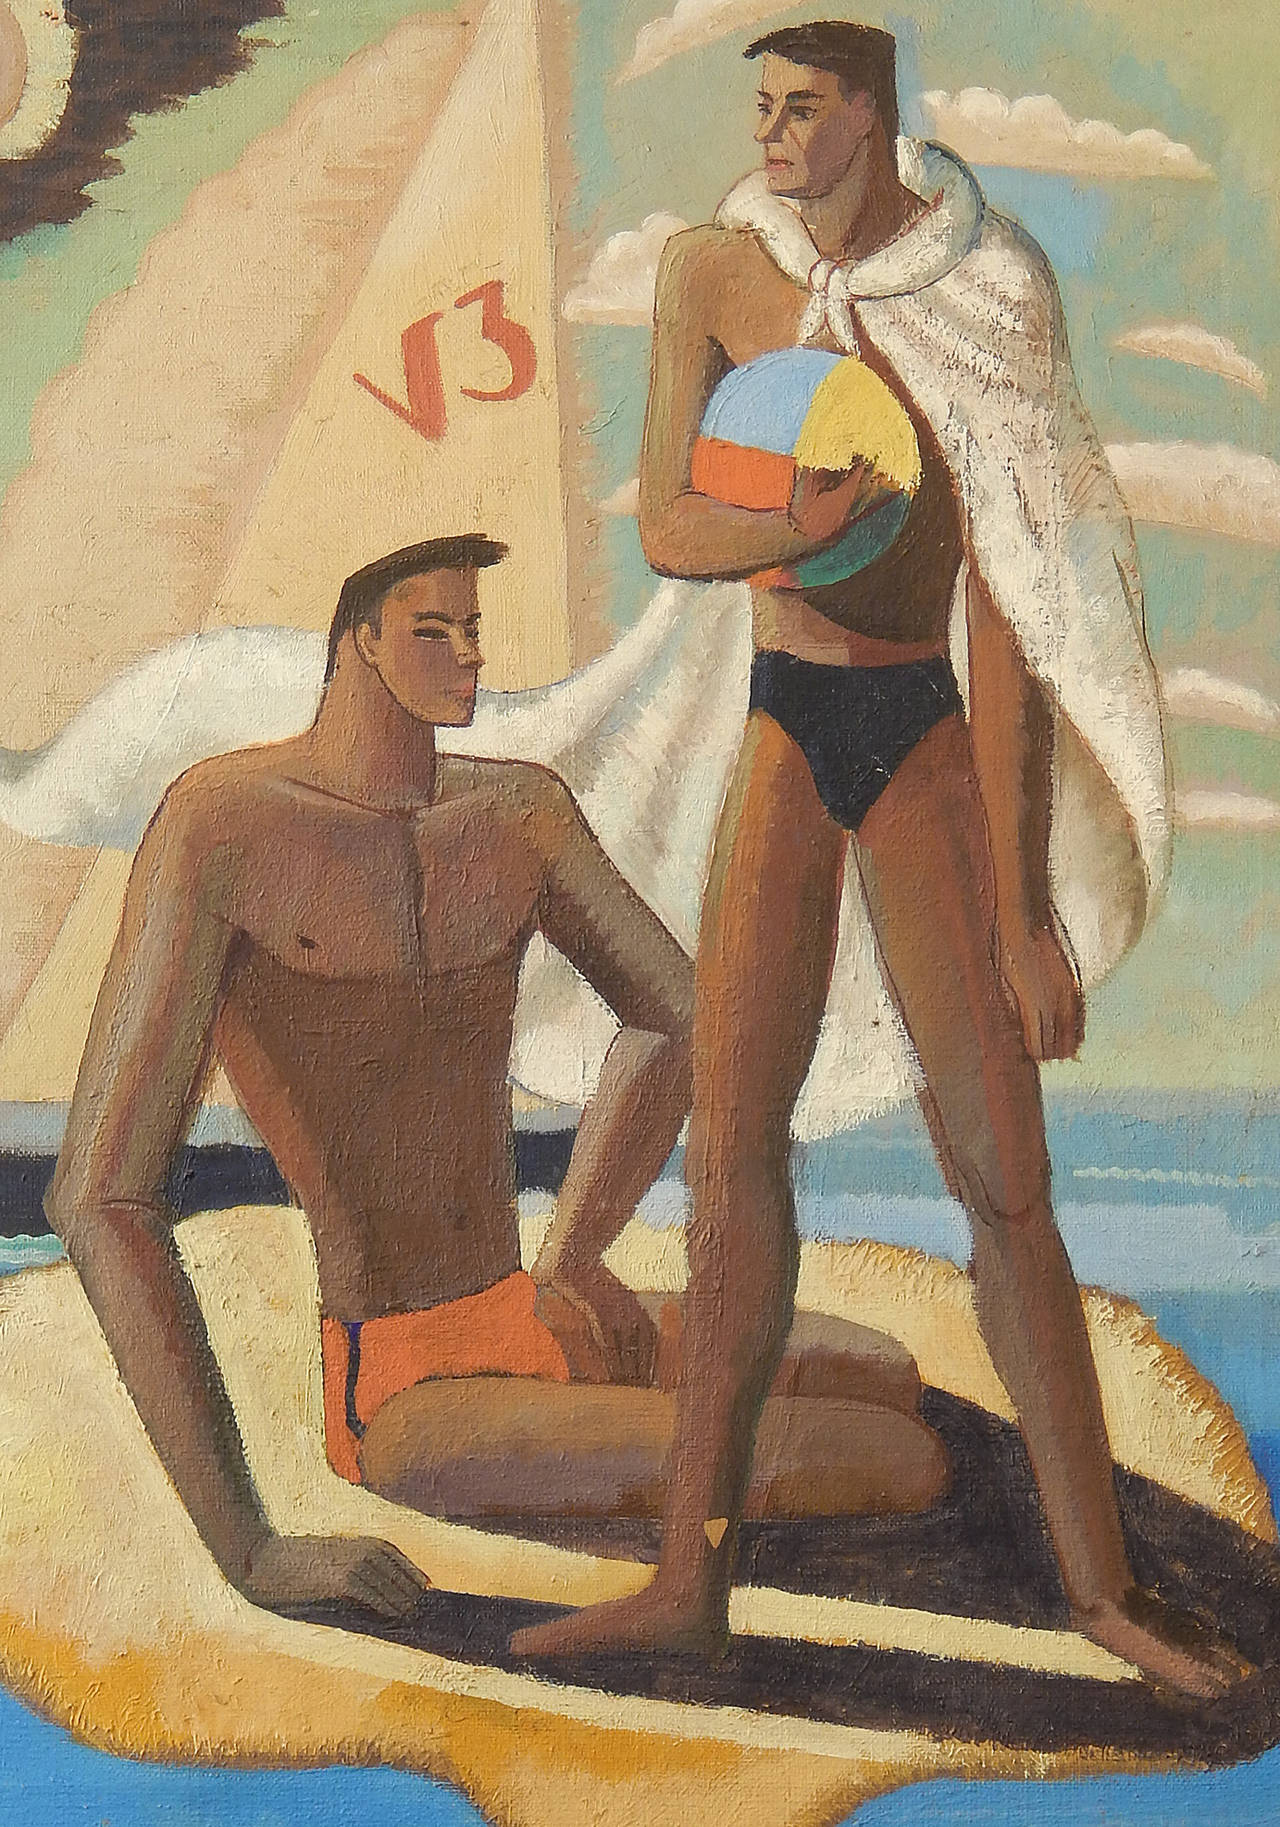 Superbly conceived and executed in a palette of deep blues, rich browns and sandy whites, this sun-drenched depiction of two swim-suited male figures with a sail boat and scudding clouds behind, clearly shows the influence of Cubism on 1930s